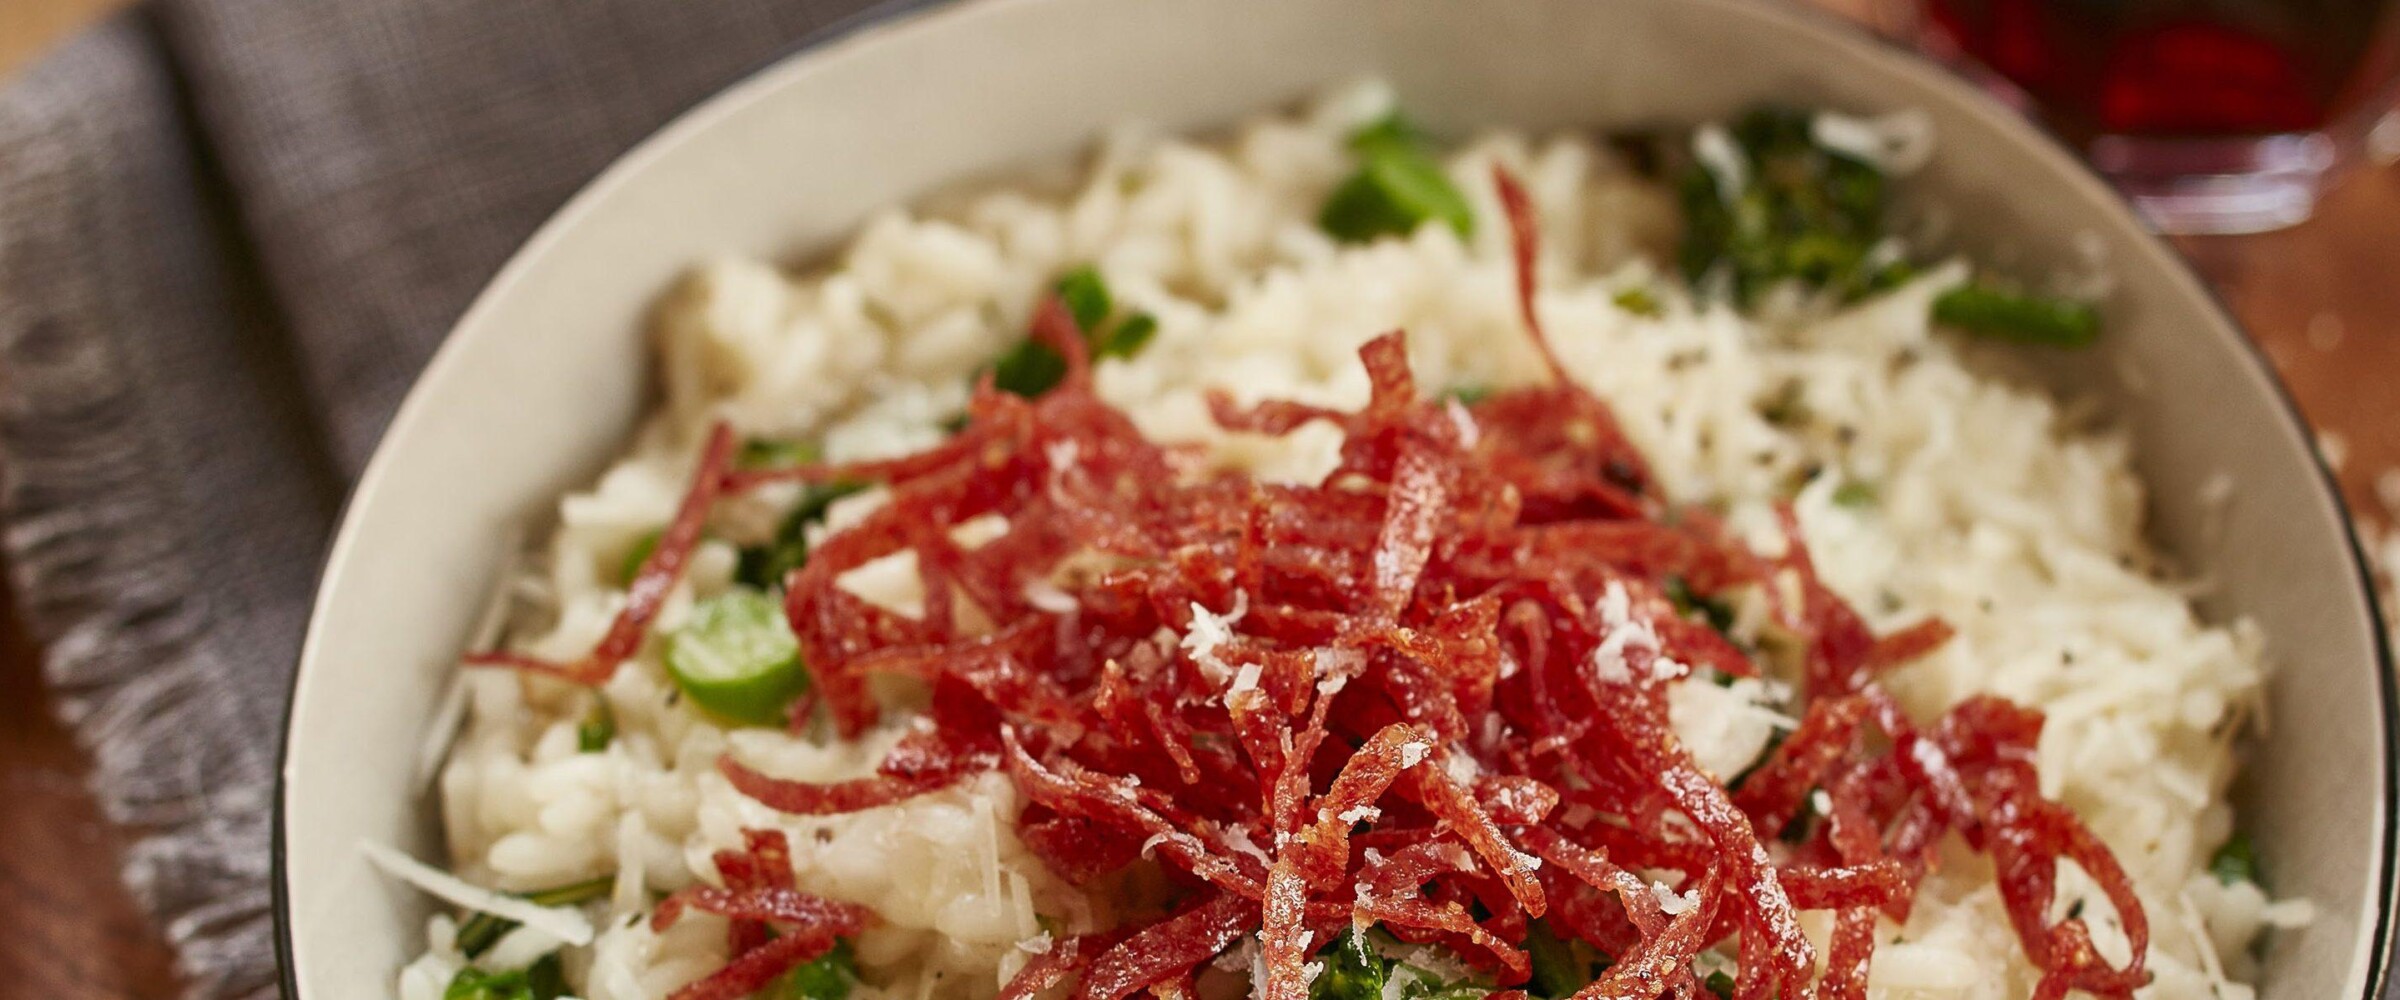 Risotto with Shredded Crispy Salami